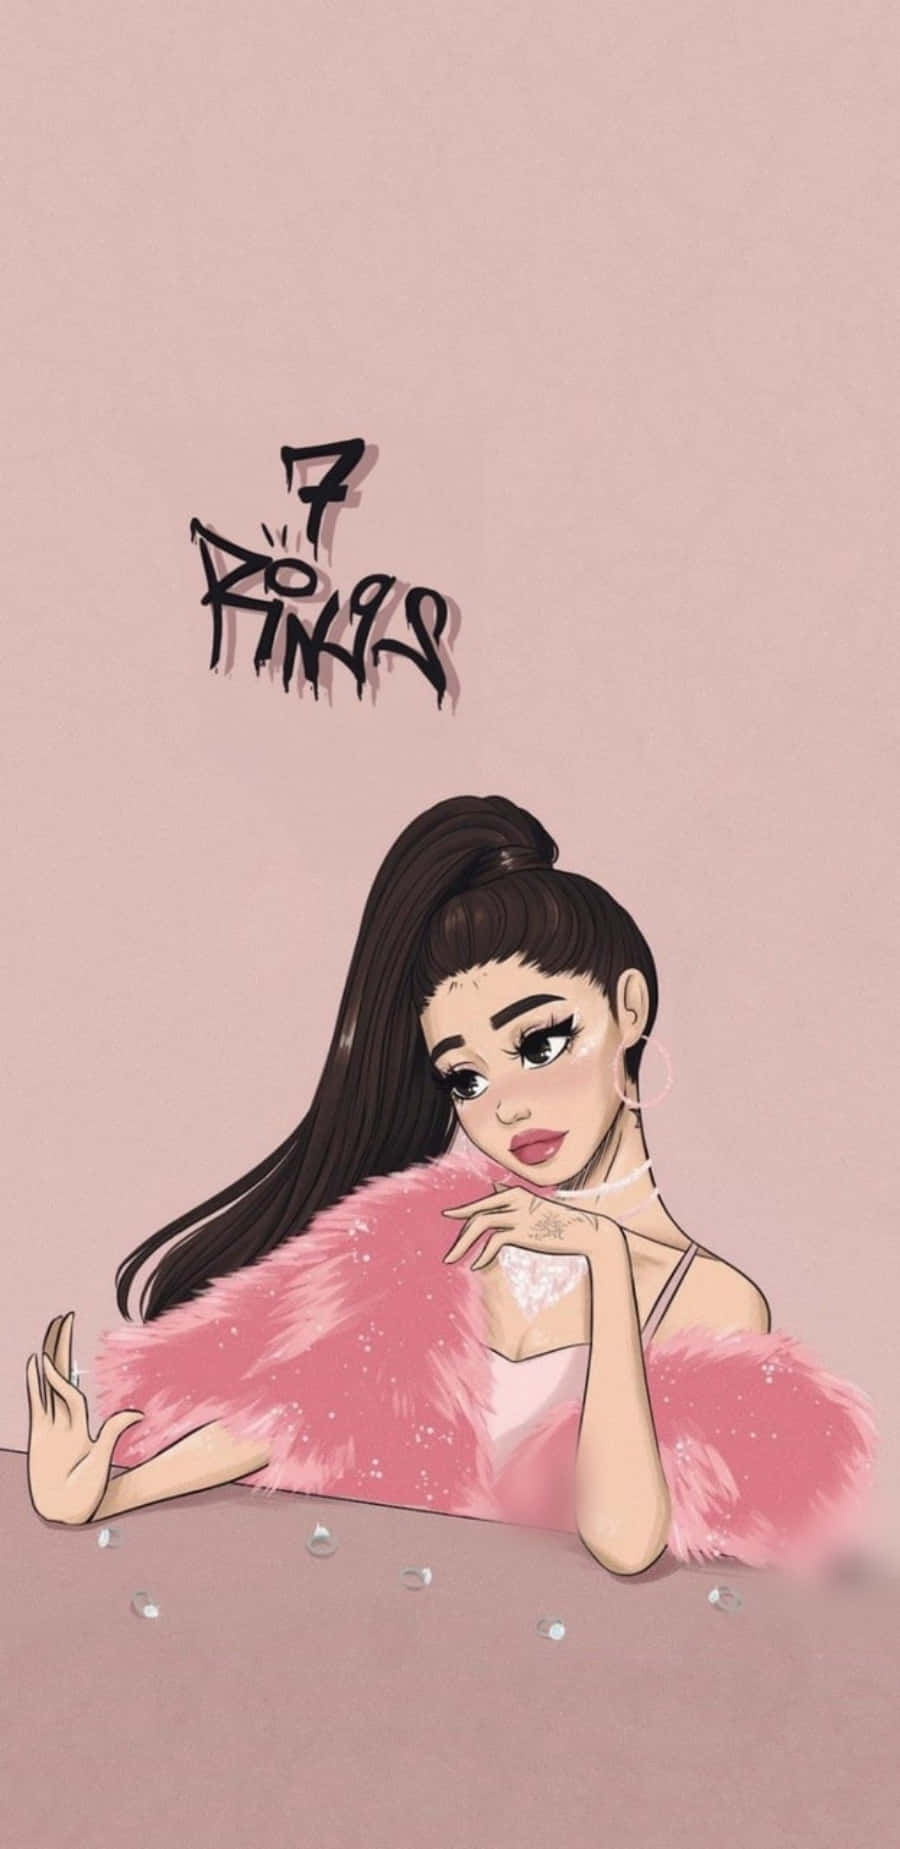 Ariana Grande looks fierce and untouchable, glowing proudly wearing seven rings Wallpaper